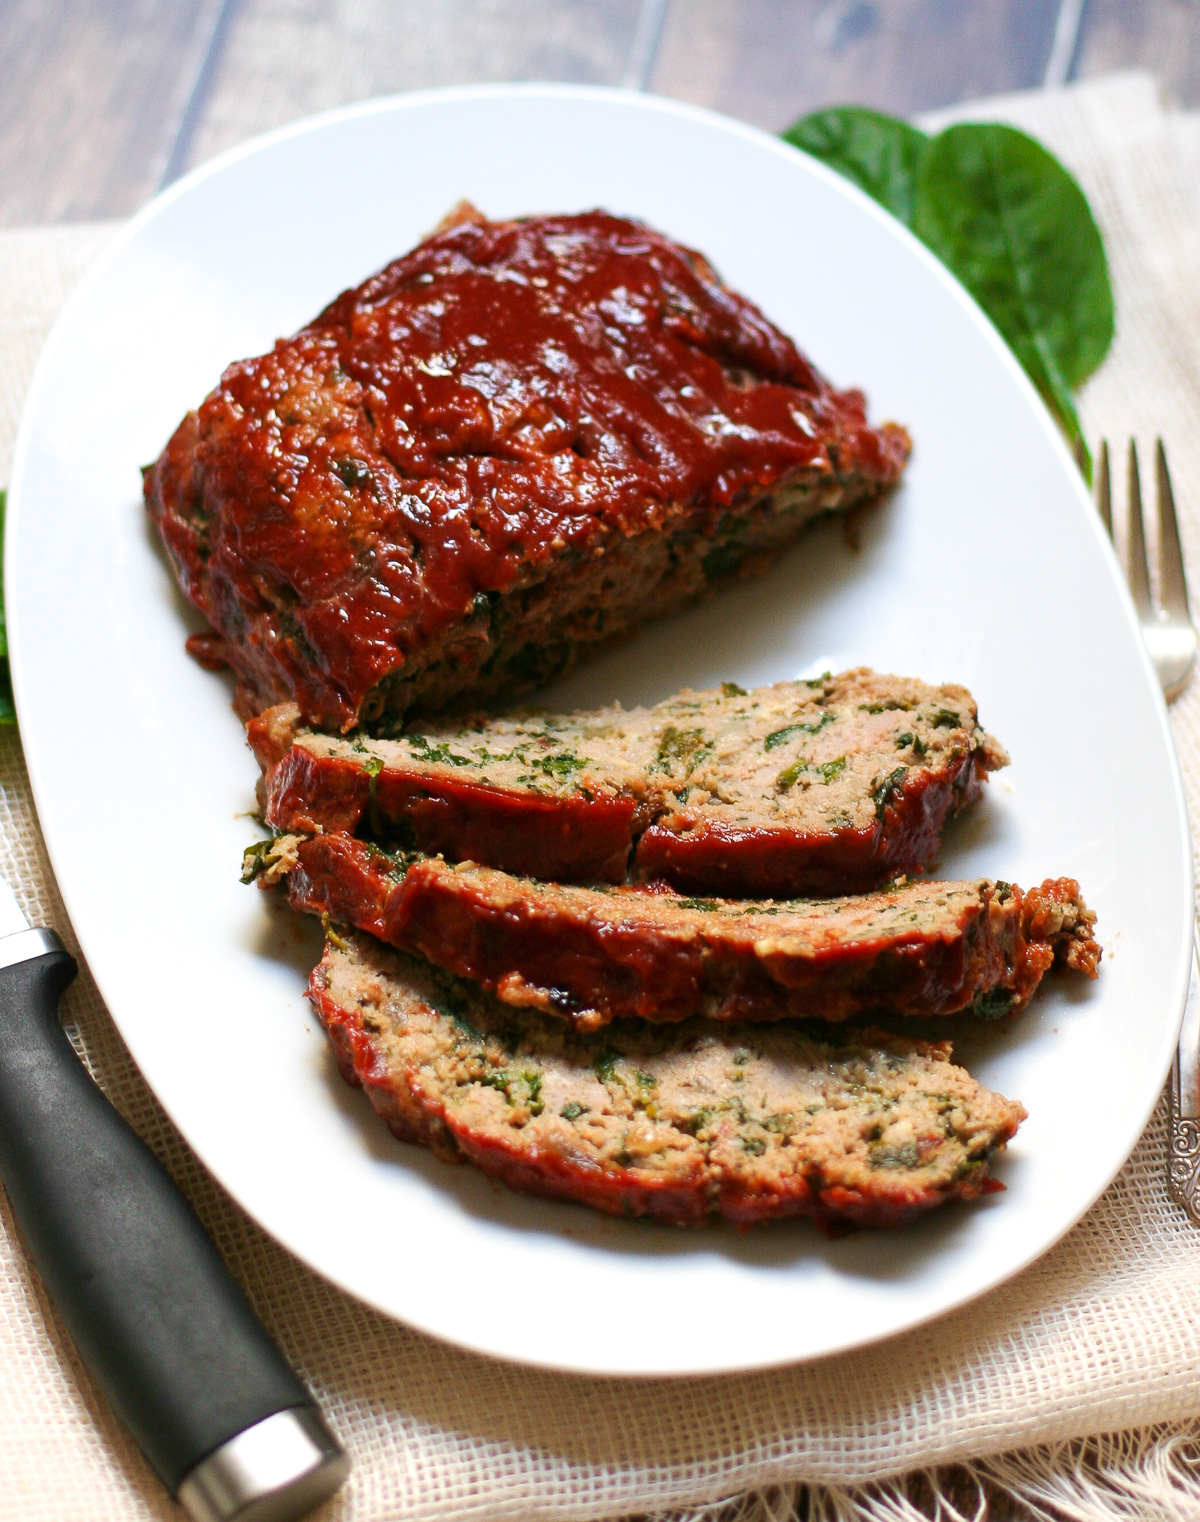 https://www.ericajulson.com/wp-content/uploads/2016/09/Kale-and-Spinach-Turkey-Meatloaf1.jpg